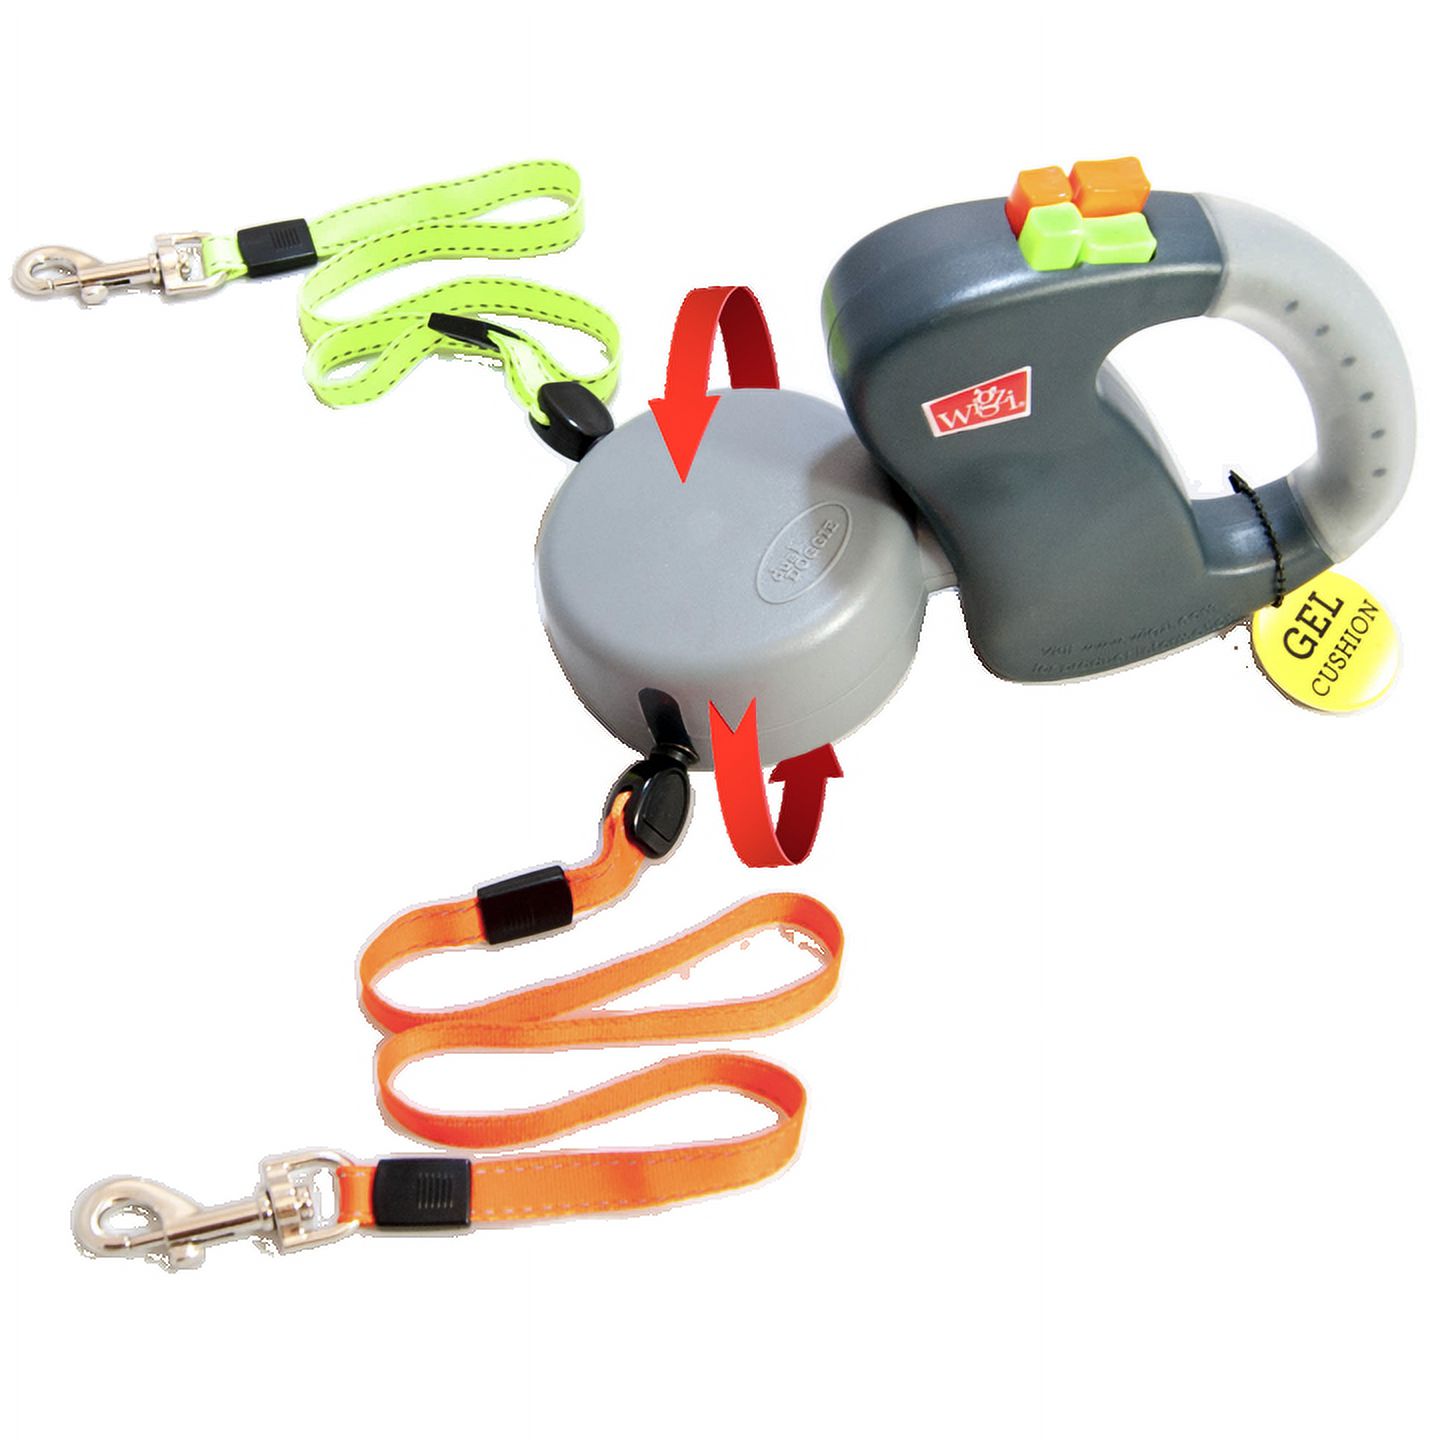 Wigzi Two Dog Retractable non-tangling dog leash with gel handle walk 2 dogs up to 50 lbs. each 10 ft. leads - image 1 of 7